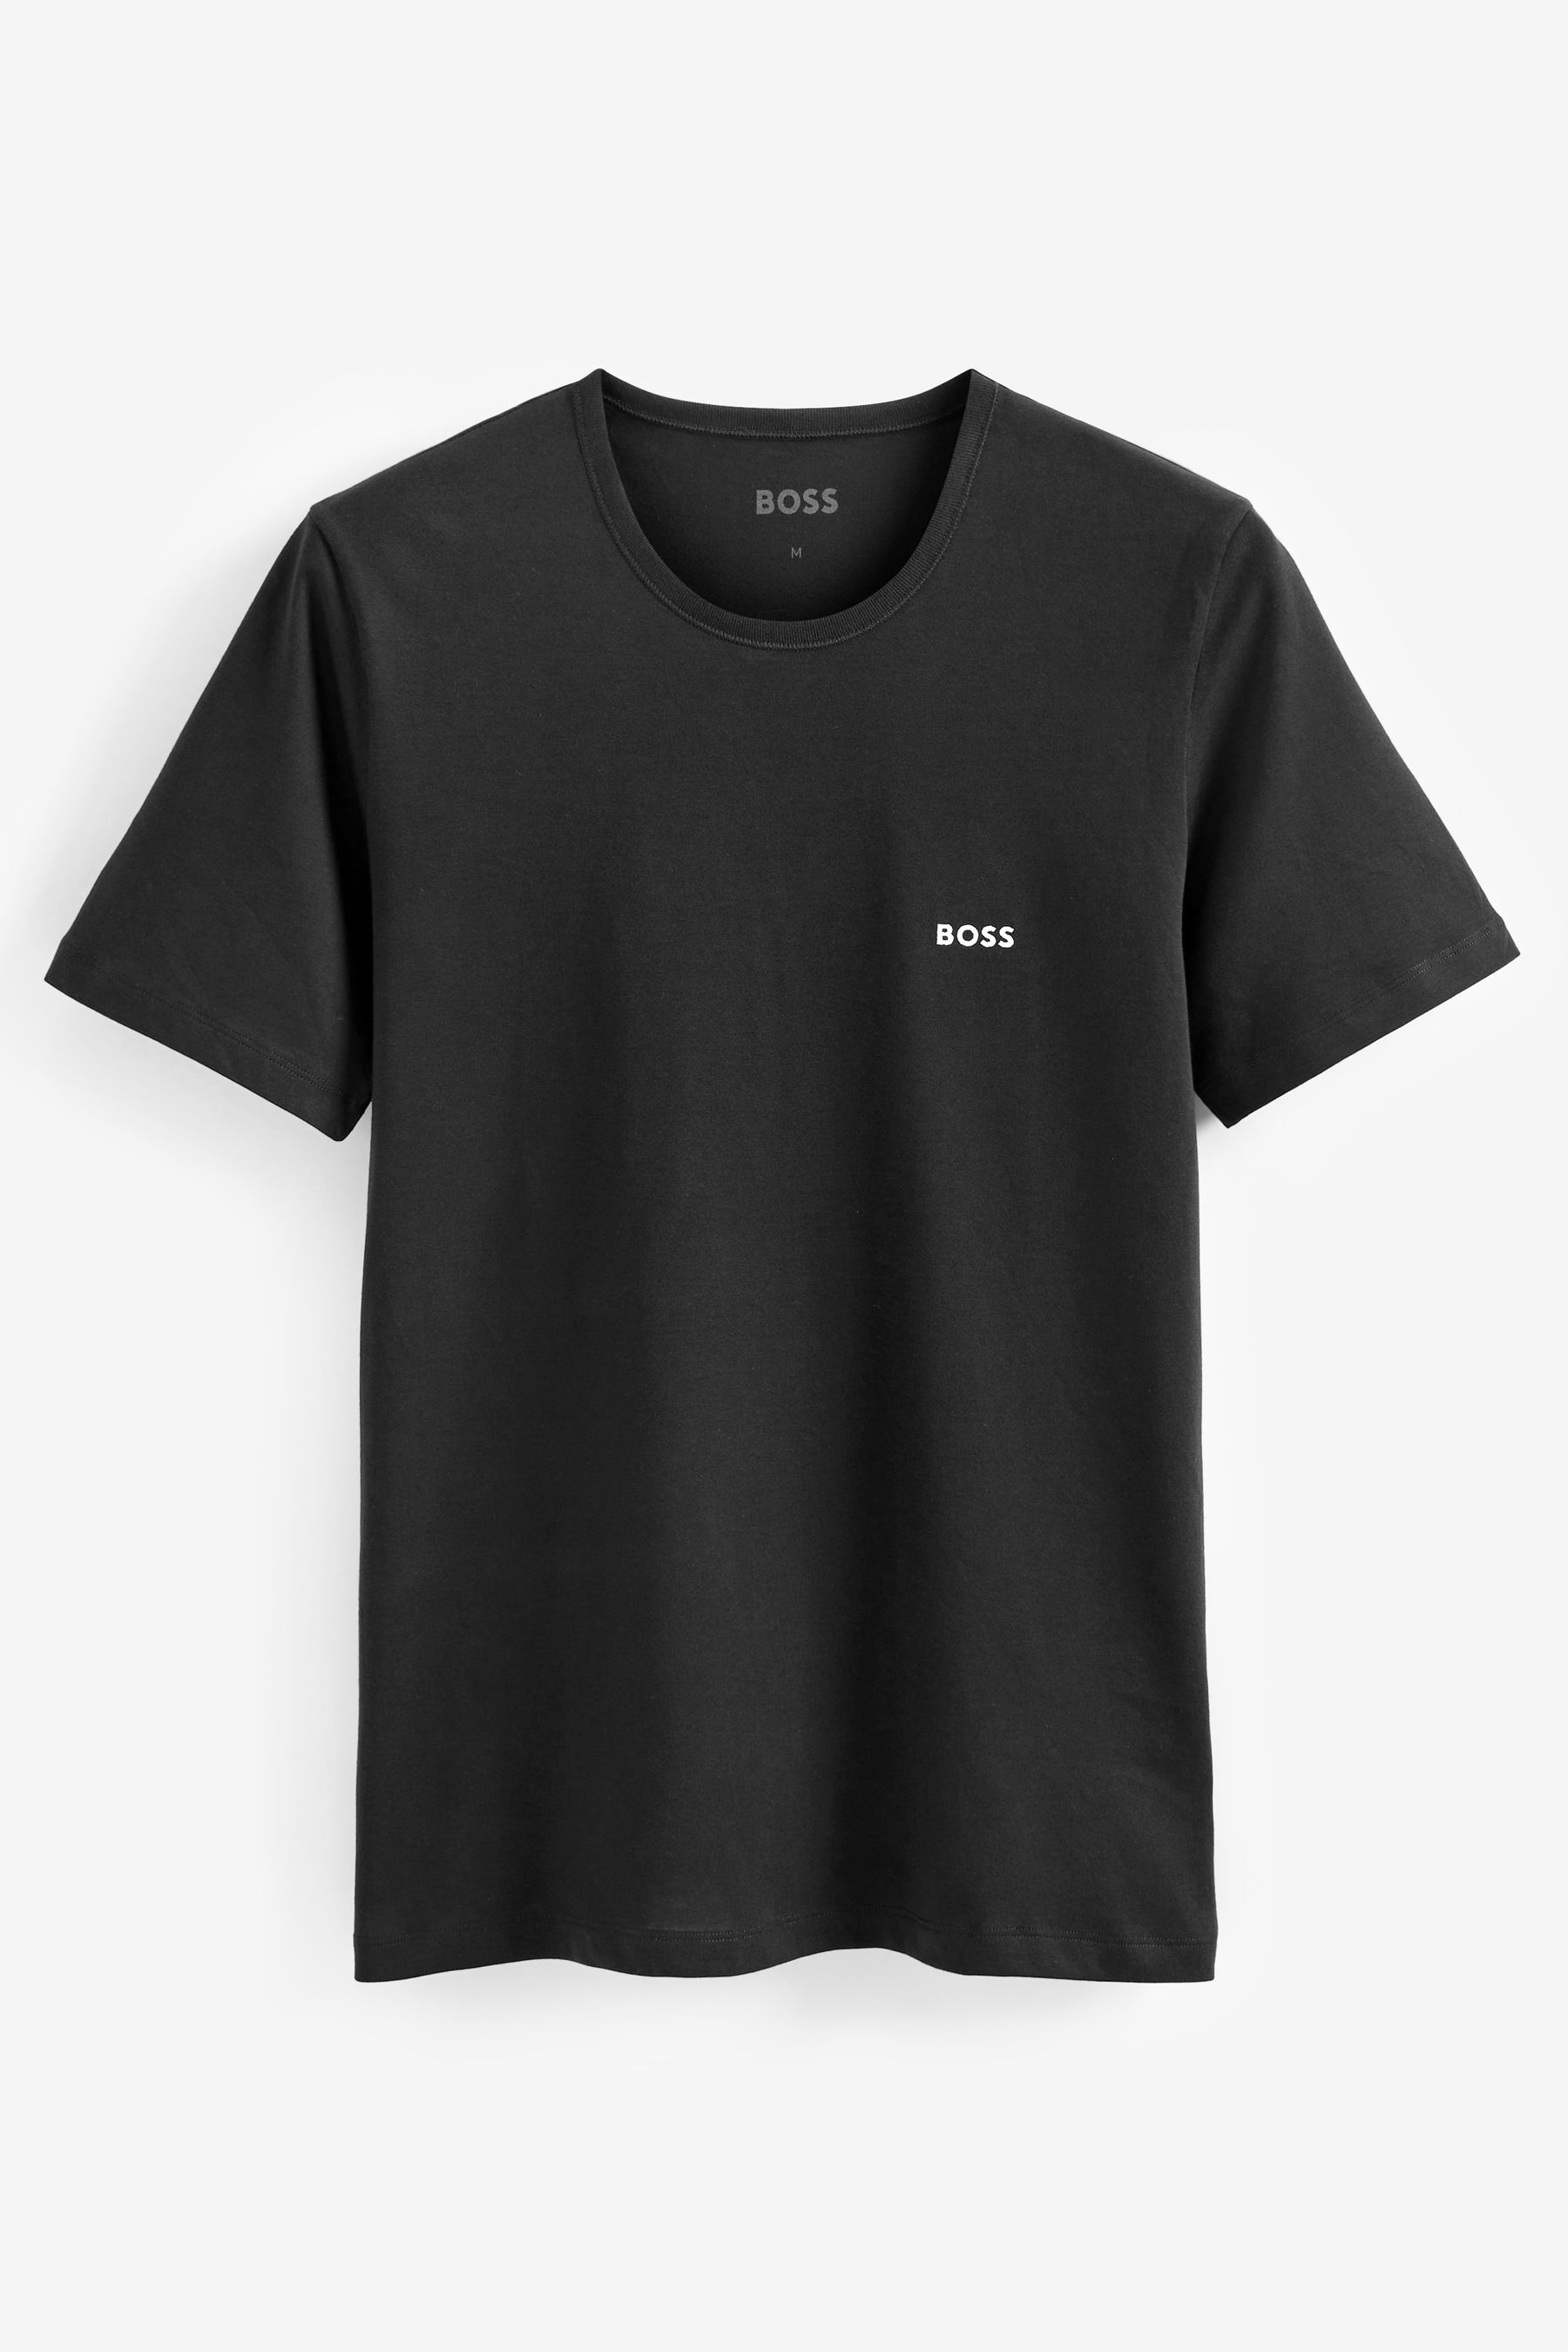 Buy BOSS Black/Beige/Navy T-Shirts 3 Pack from the Next UK online shop